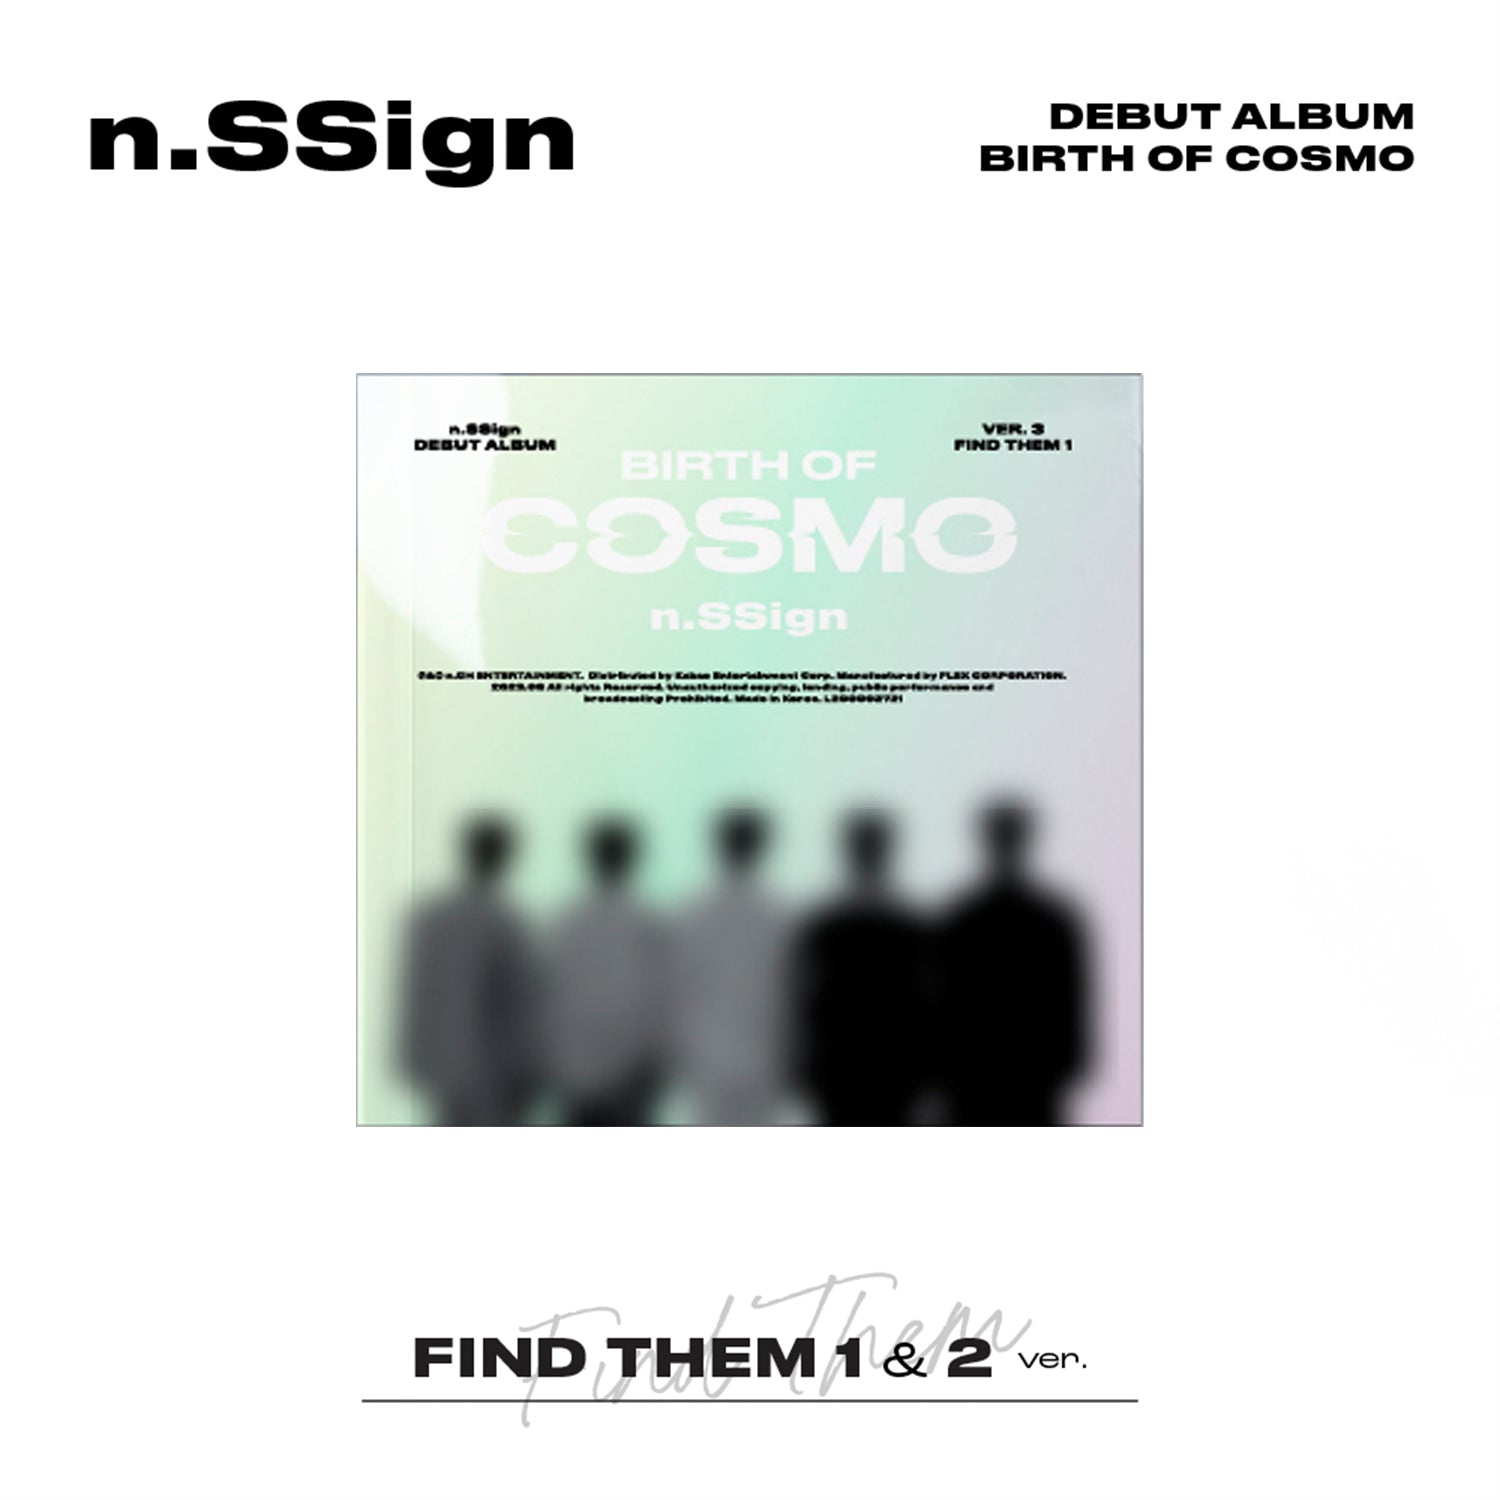 N.SSIGN DEBUT ALBUM 'BIRTH OF COSMO' (FIND THEM) FIND THEM 1 VERSION COVER